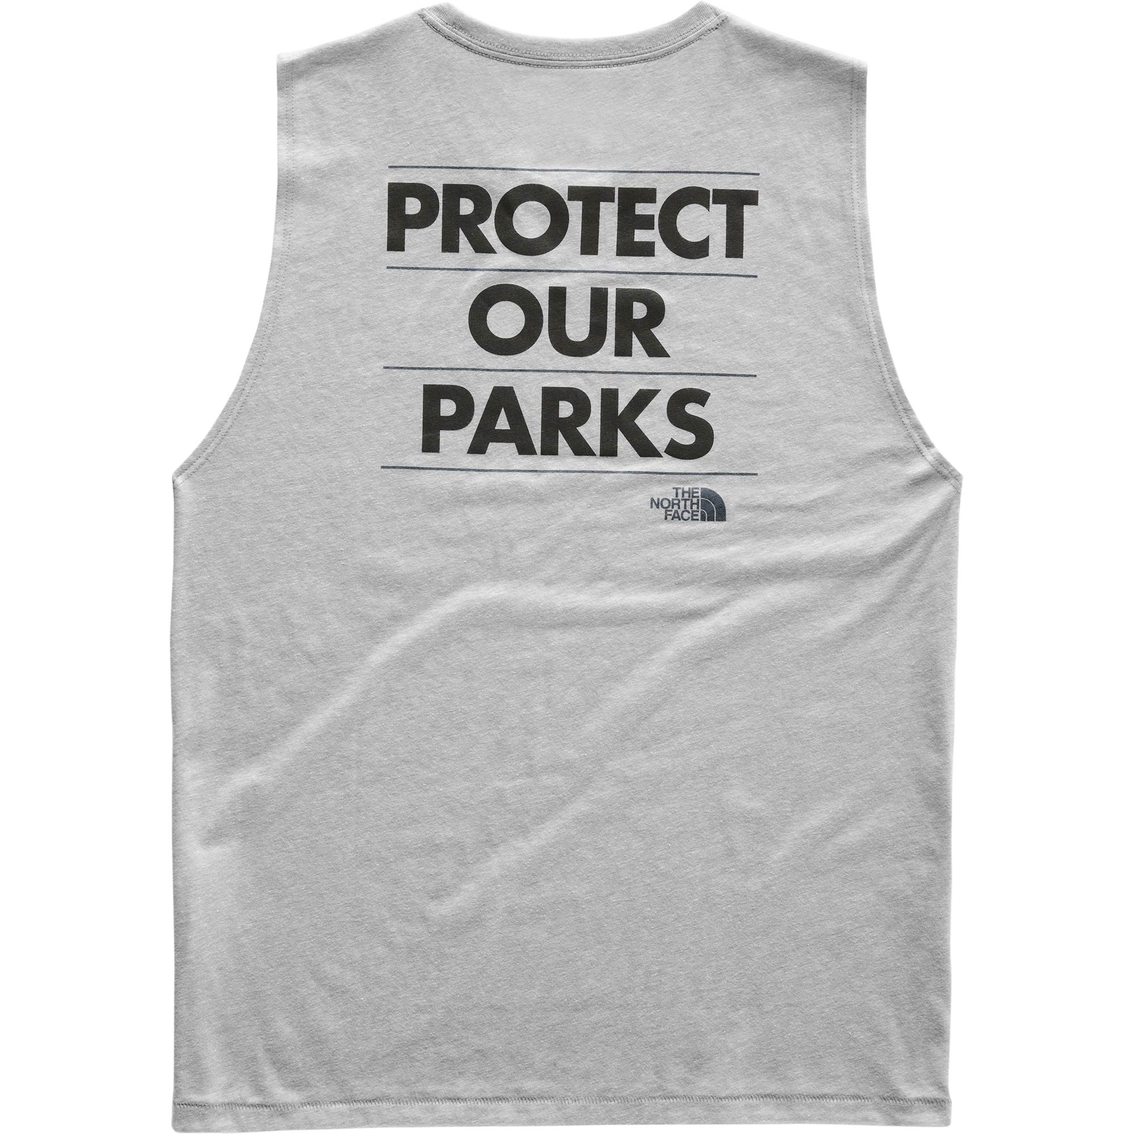 The North Face Bottle Source Tank - Image 2 of 2